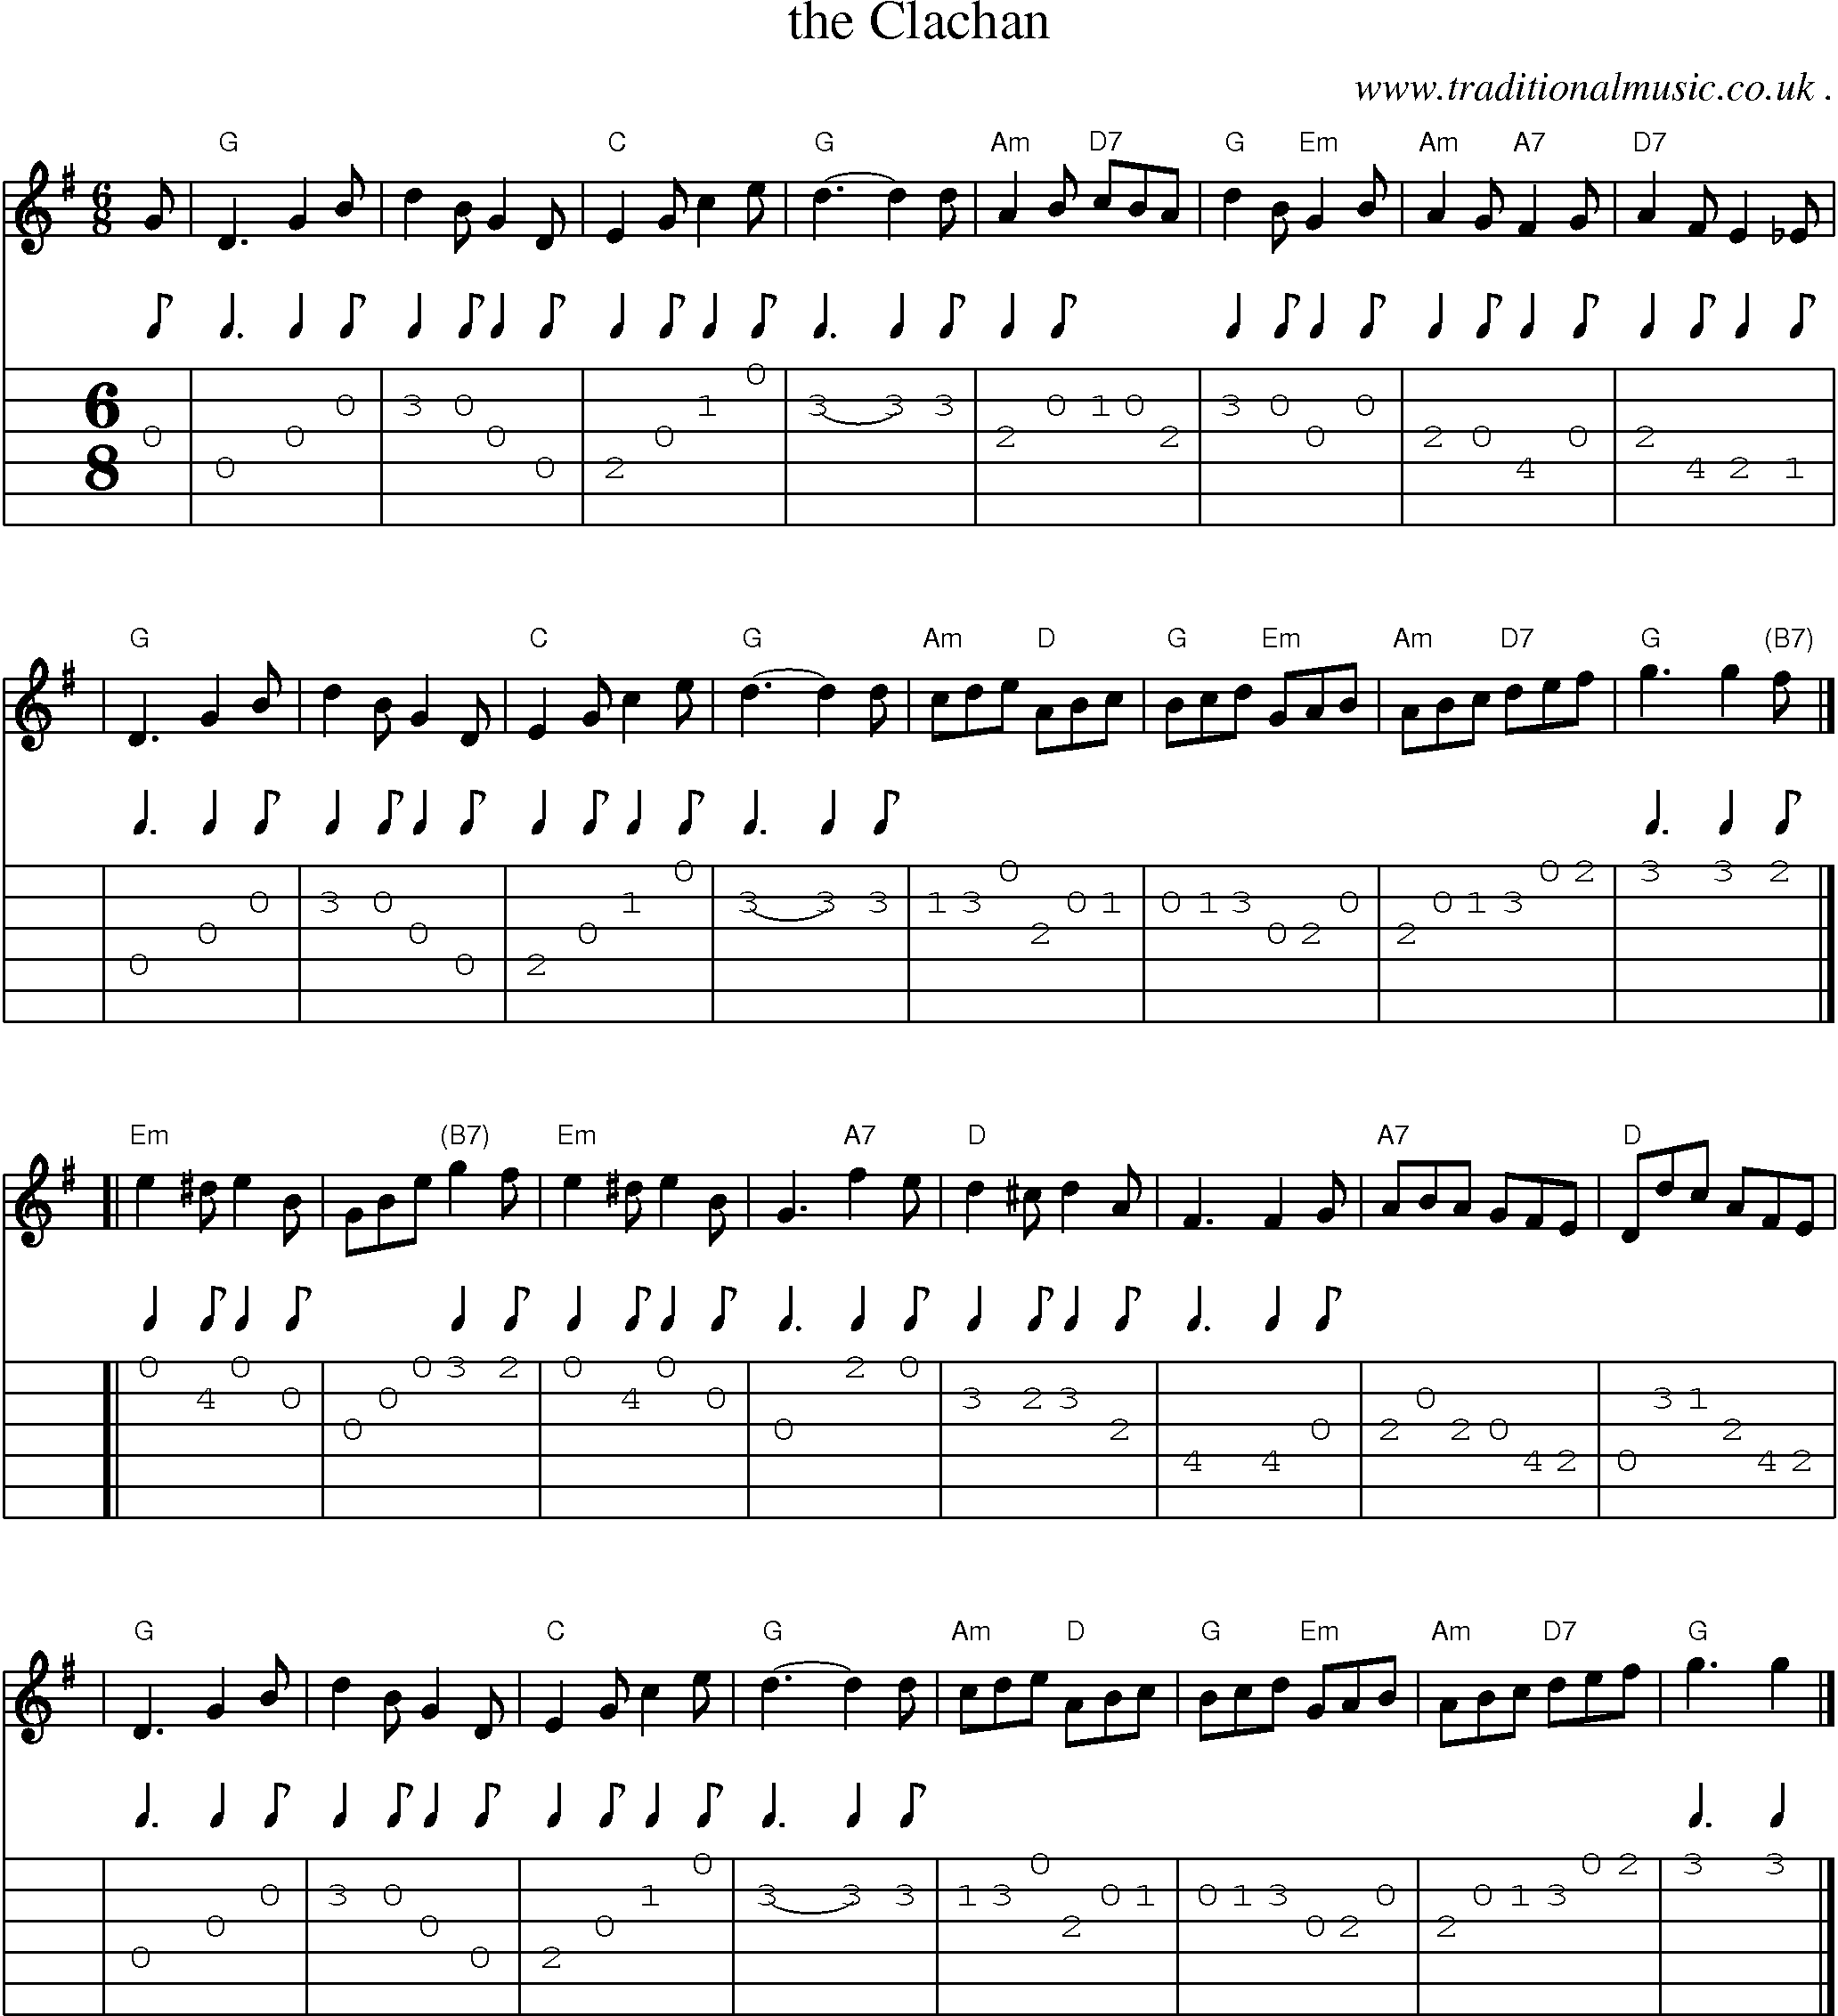 Sheet-music  score, Chords and Guitar Tabs for The Clachan